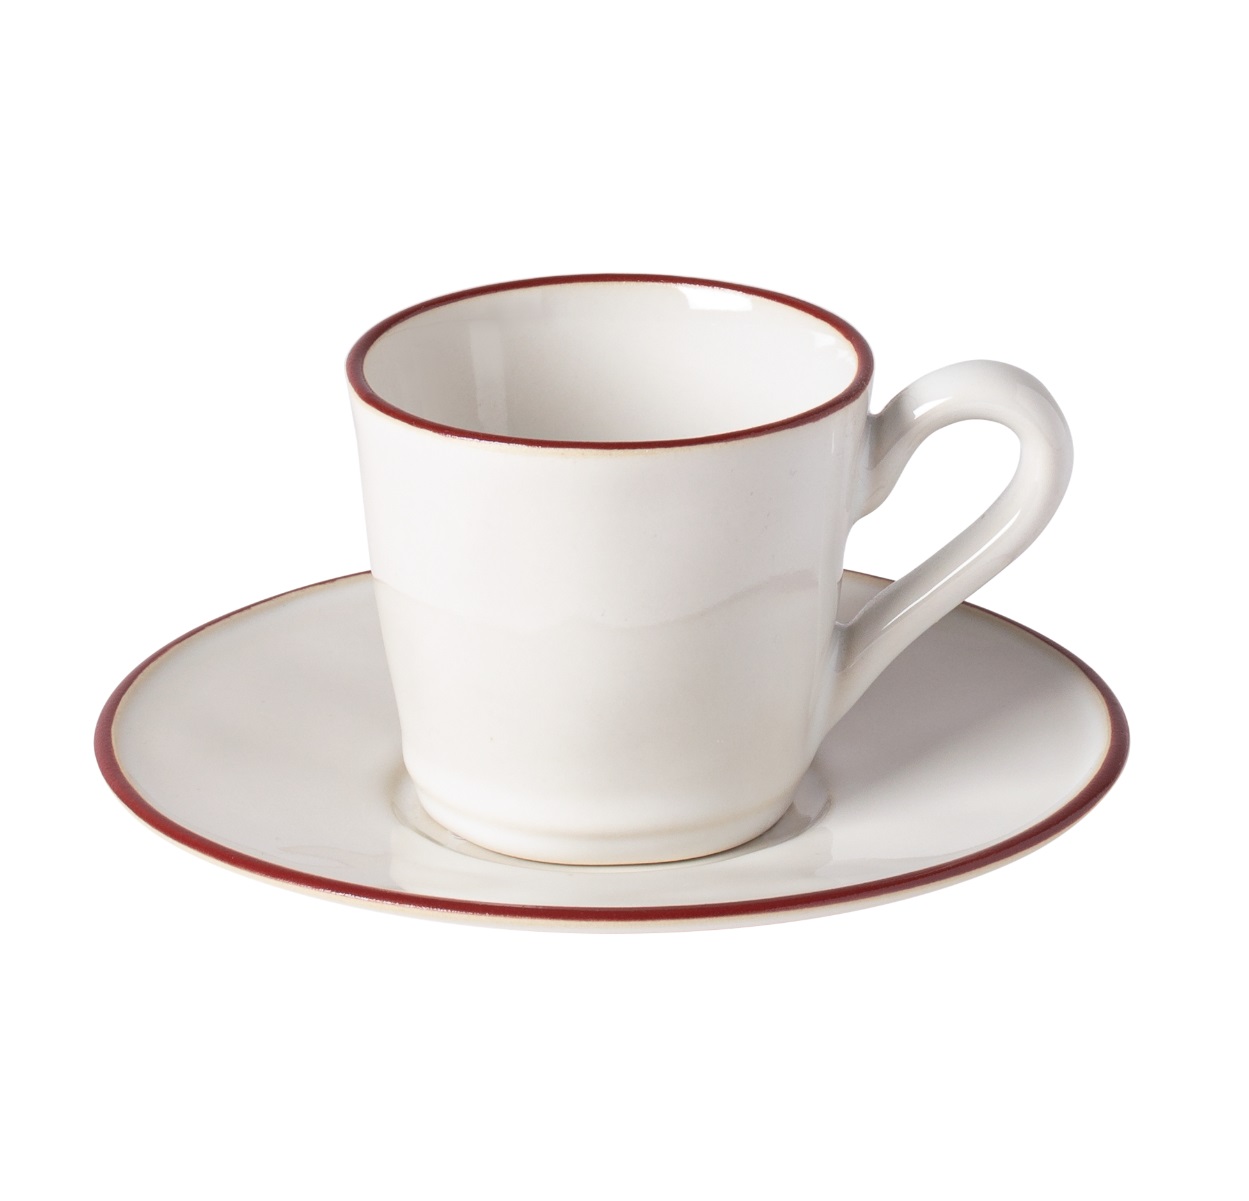 Beja White/red Tea Cup & Saucer 0.19l Gift